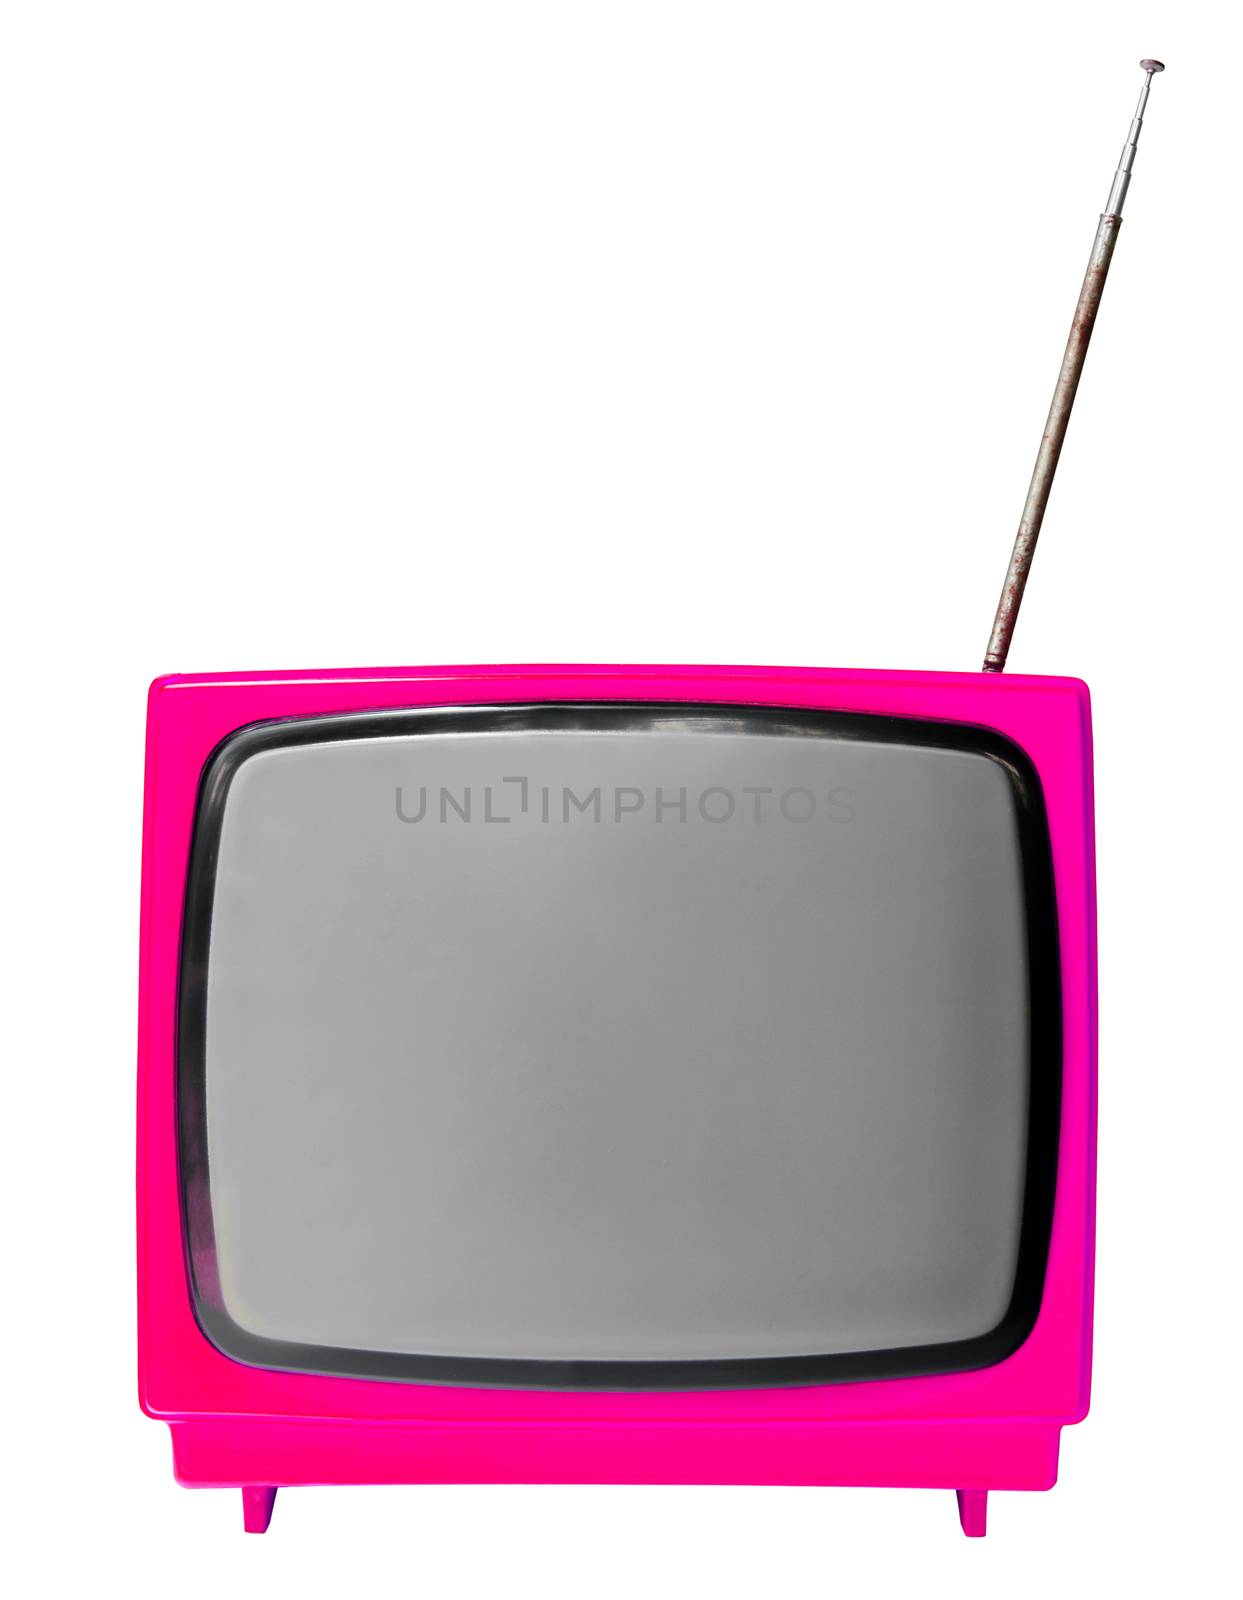 Pink light vintage analog television isolated over white background, clipping path.